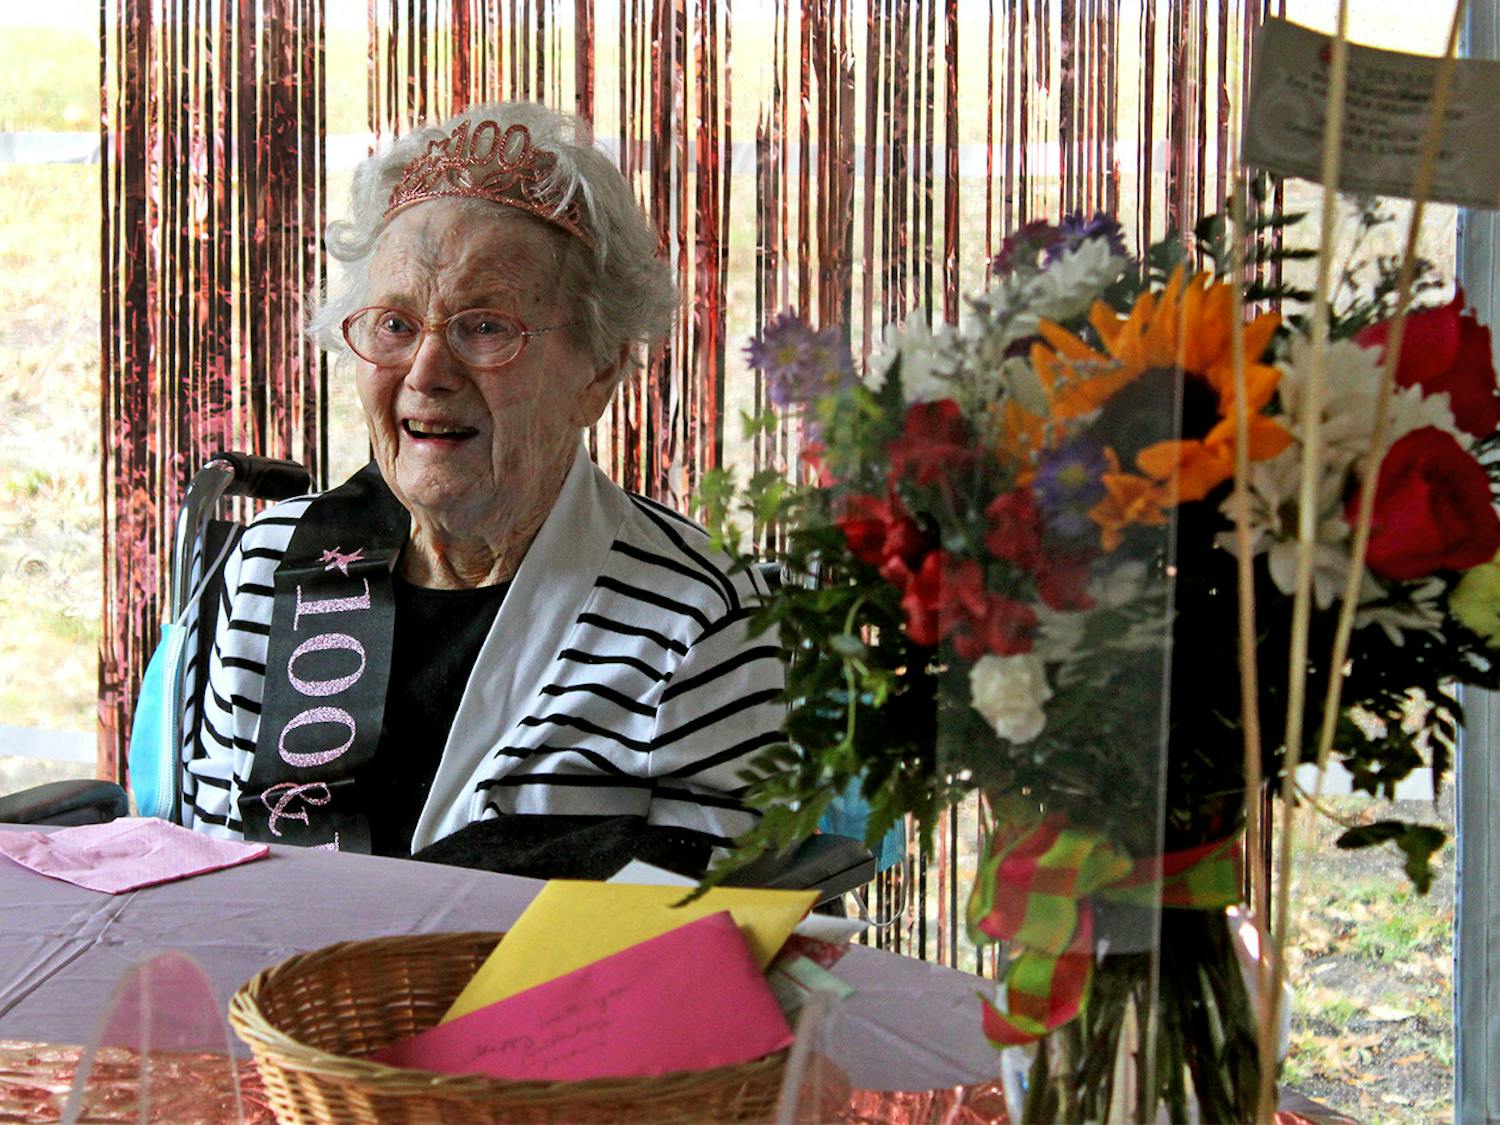 Marion Broadaway smiles as she tells stories of her life to family members and reporters at her 100th birthday celebration on Friday, Feb. 5, 2021.